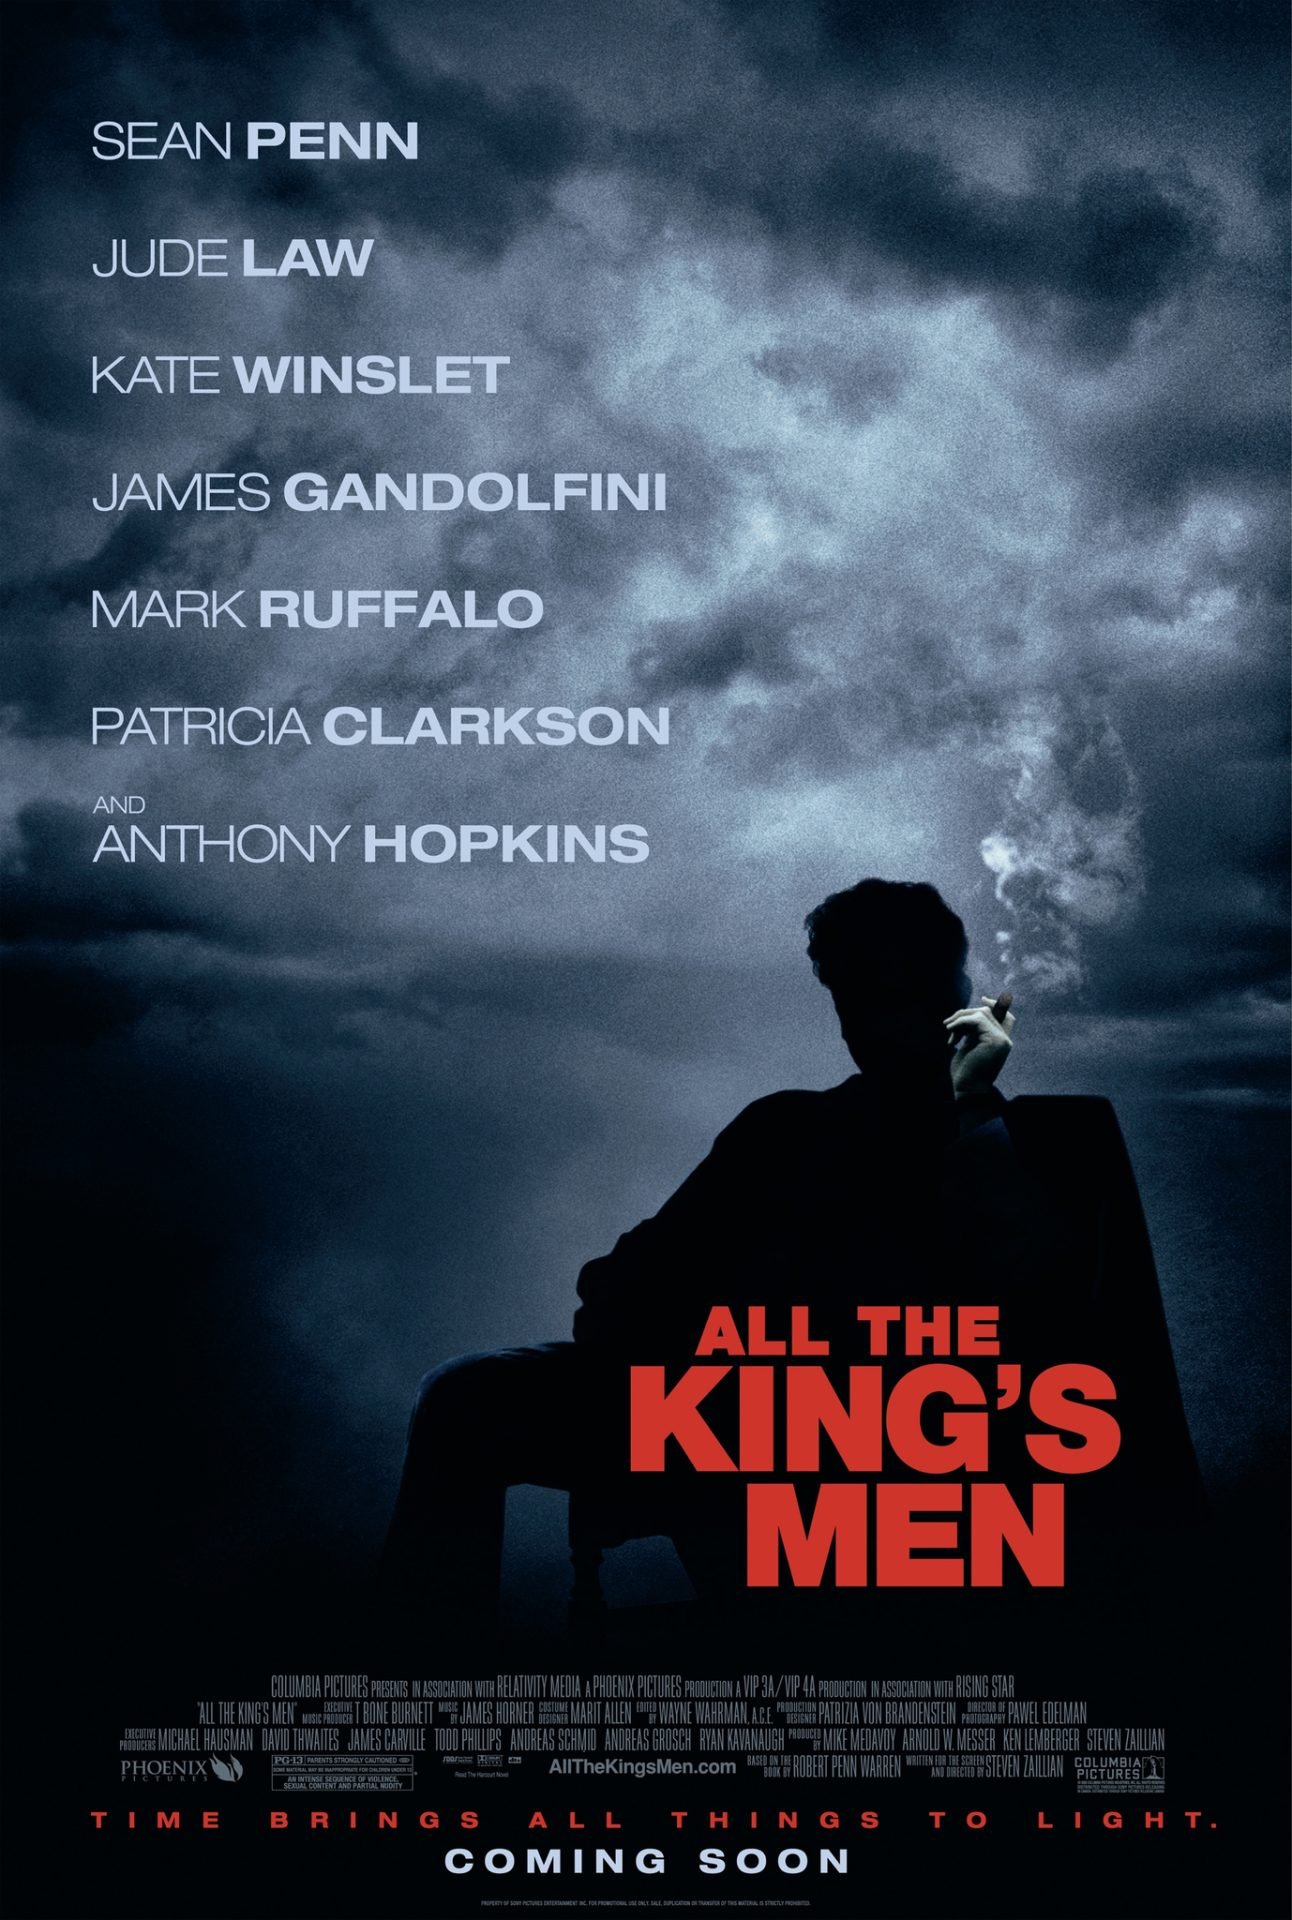 All the King's Men (2006) Review 1